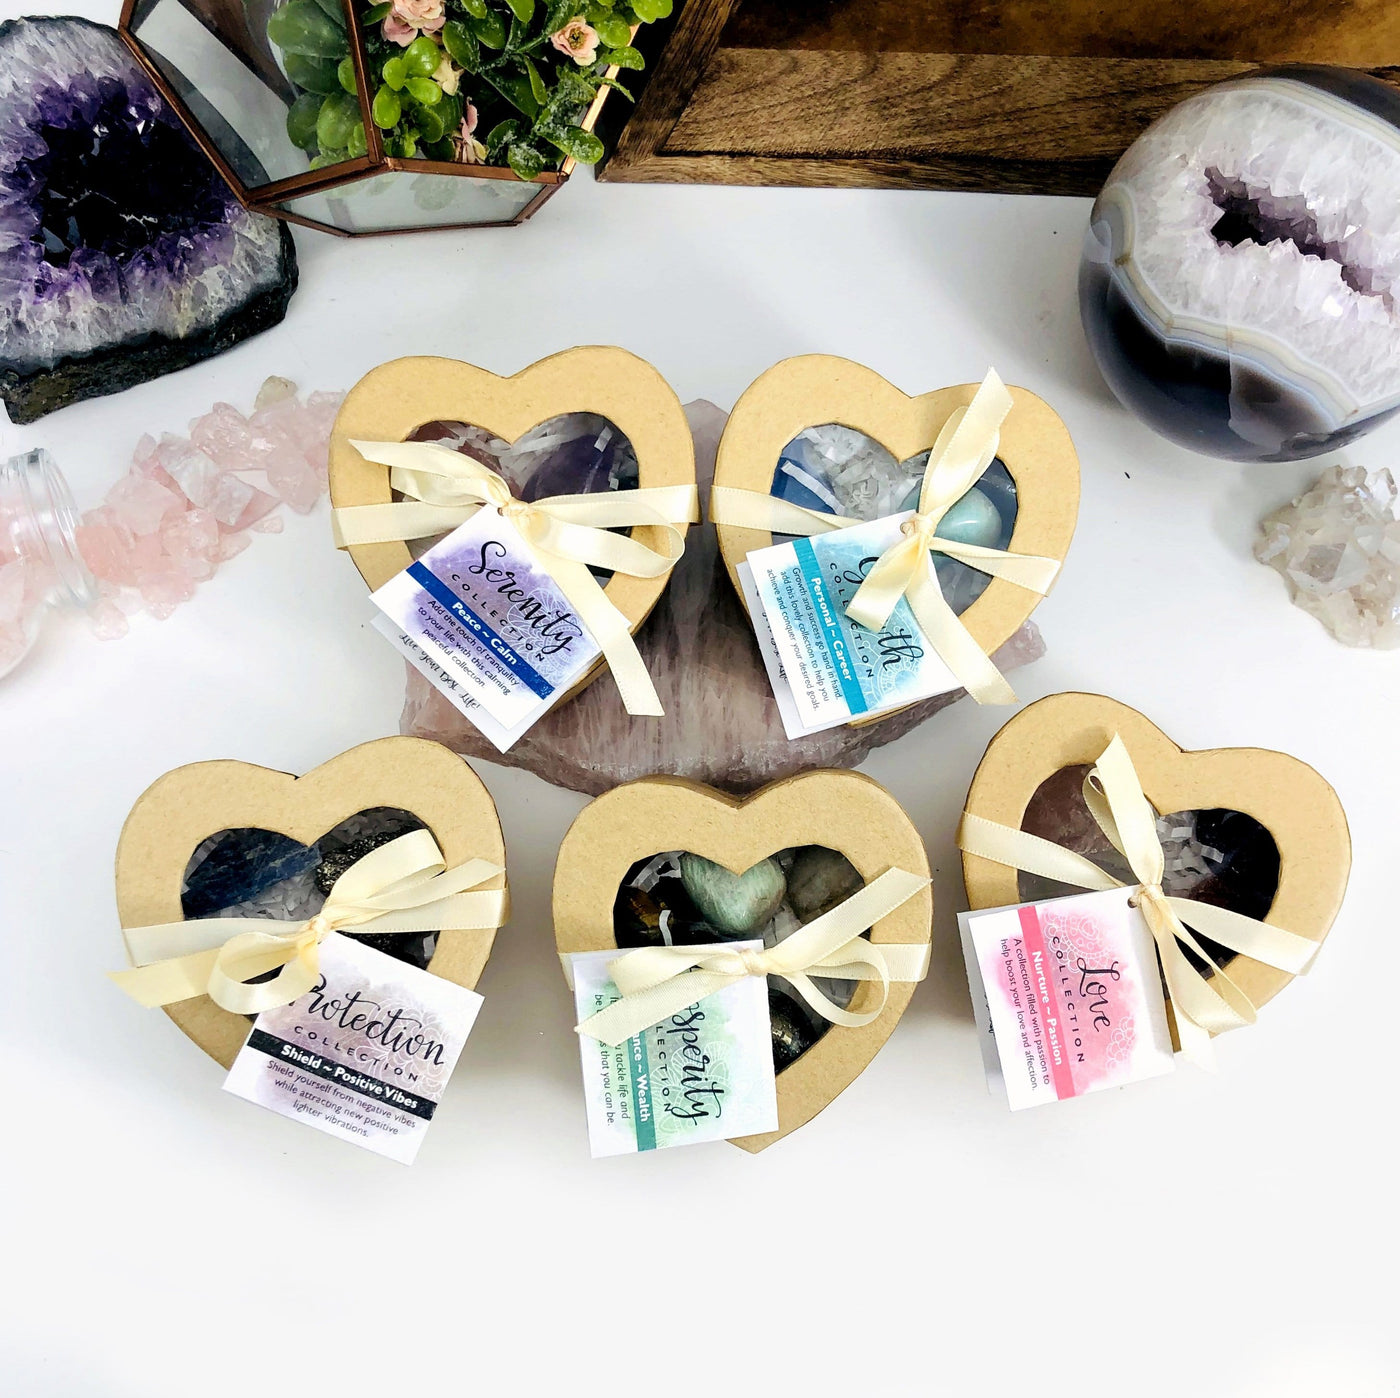 Various heart shaped box collections come in serenity growth protection prosperity love boxes